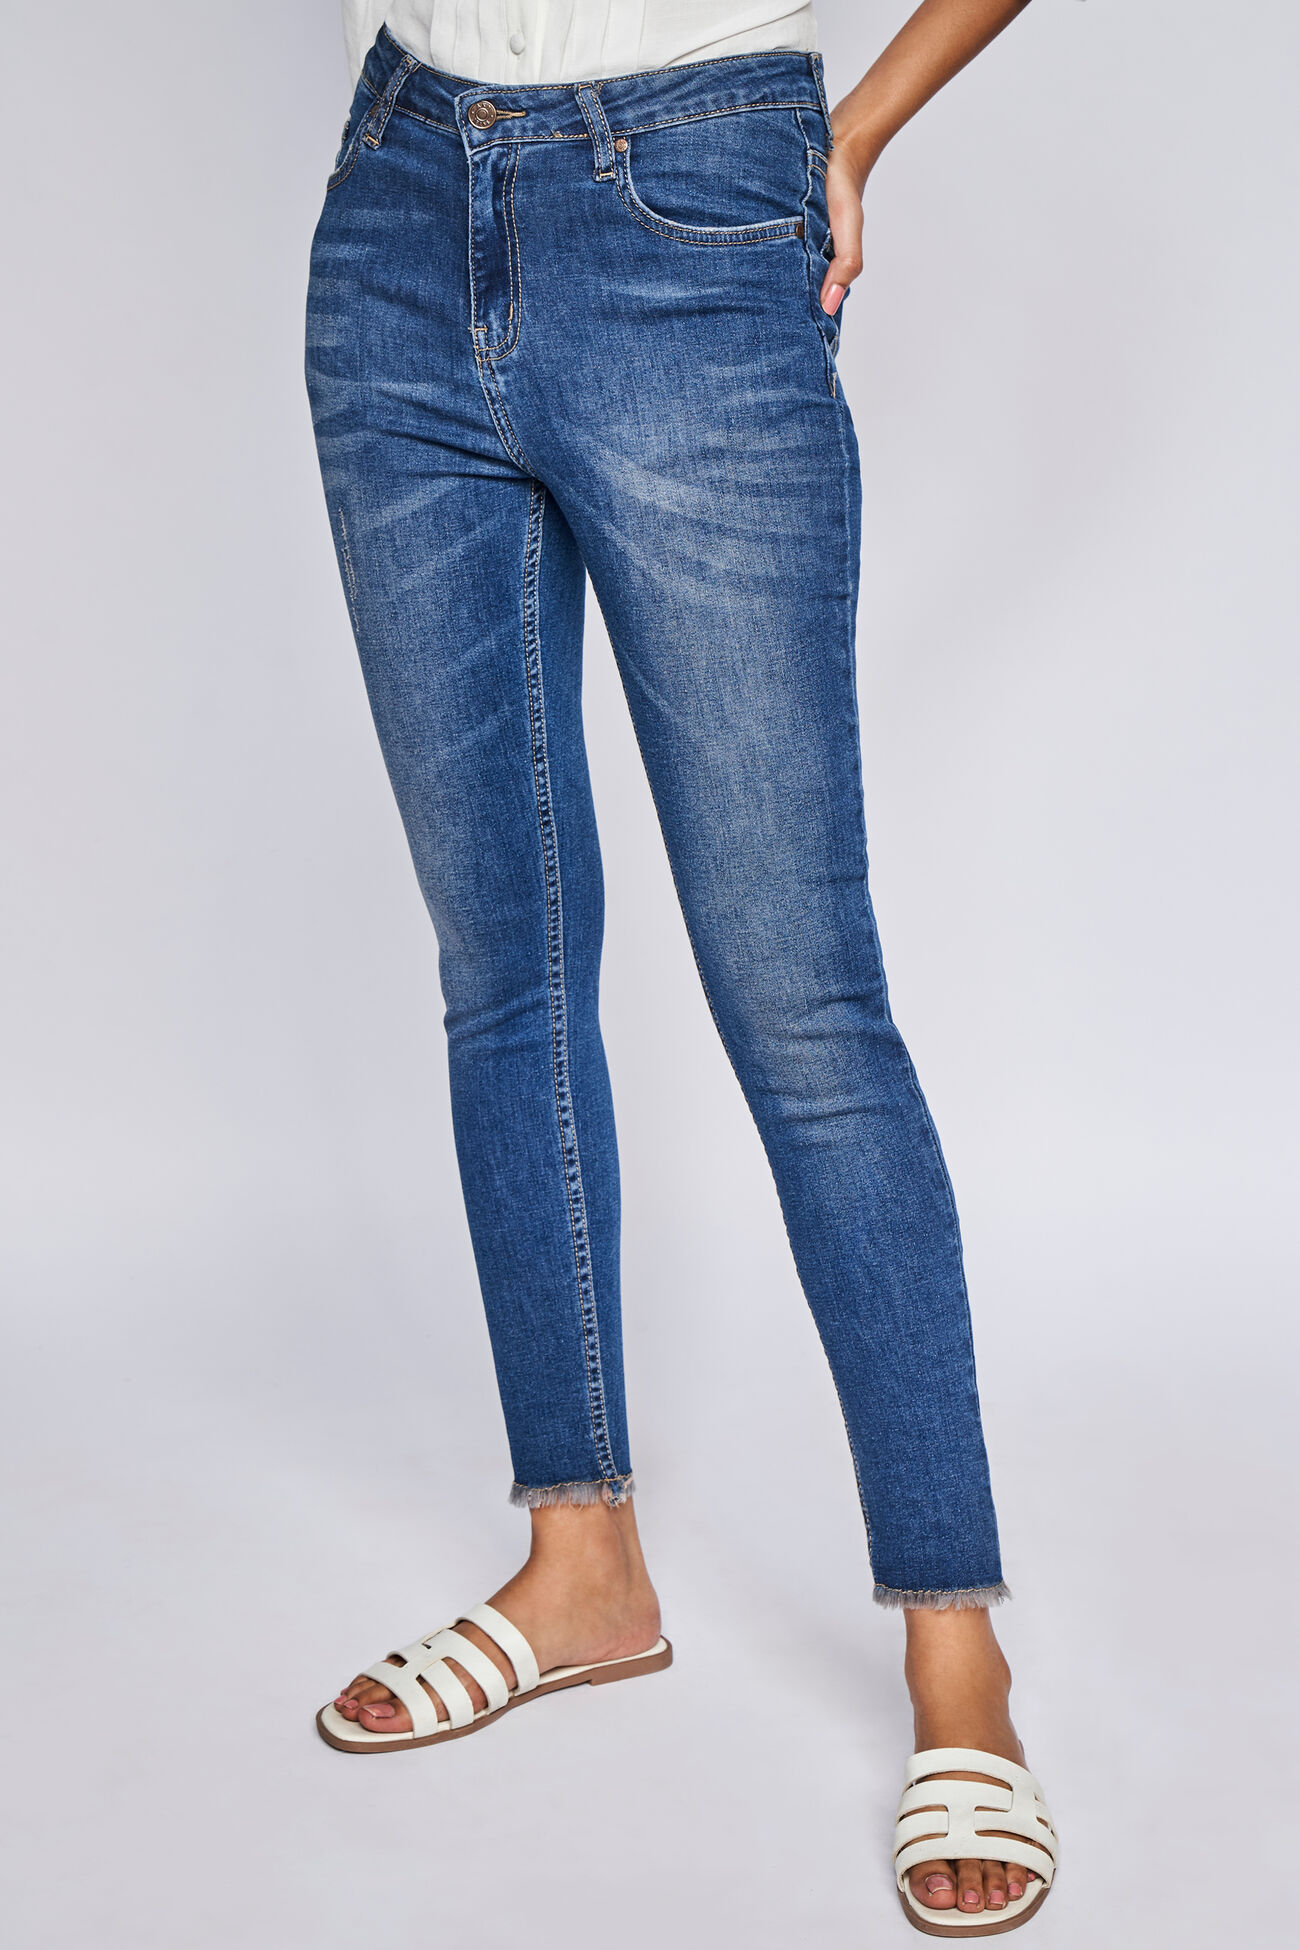 Buy Blue Solid Straight Bottom Online at Best Price at ANDIndia ...